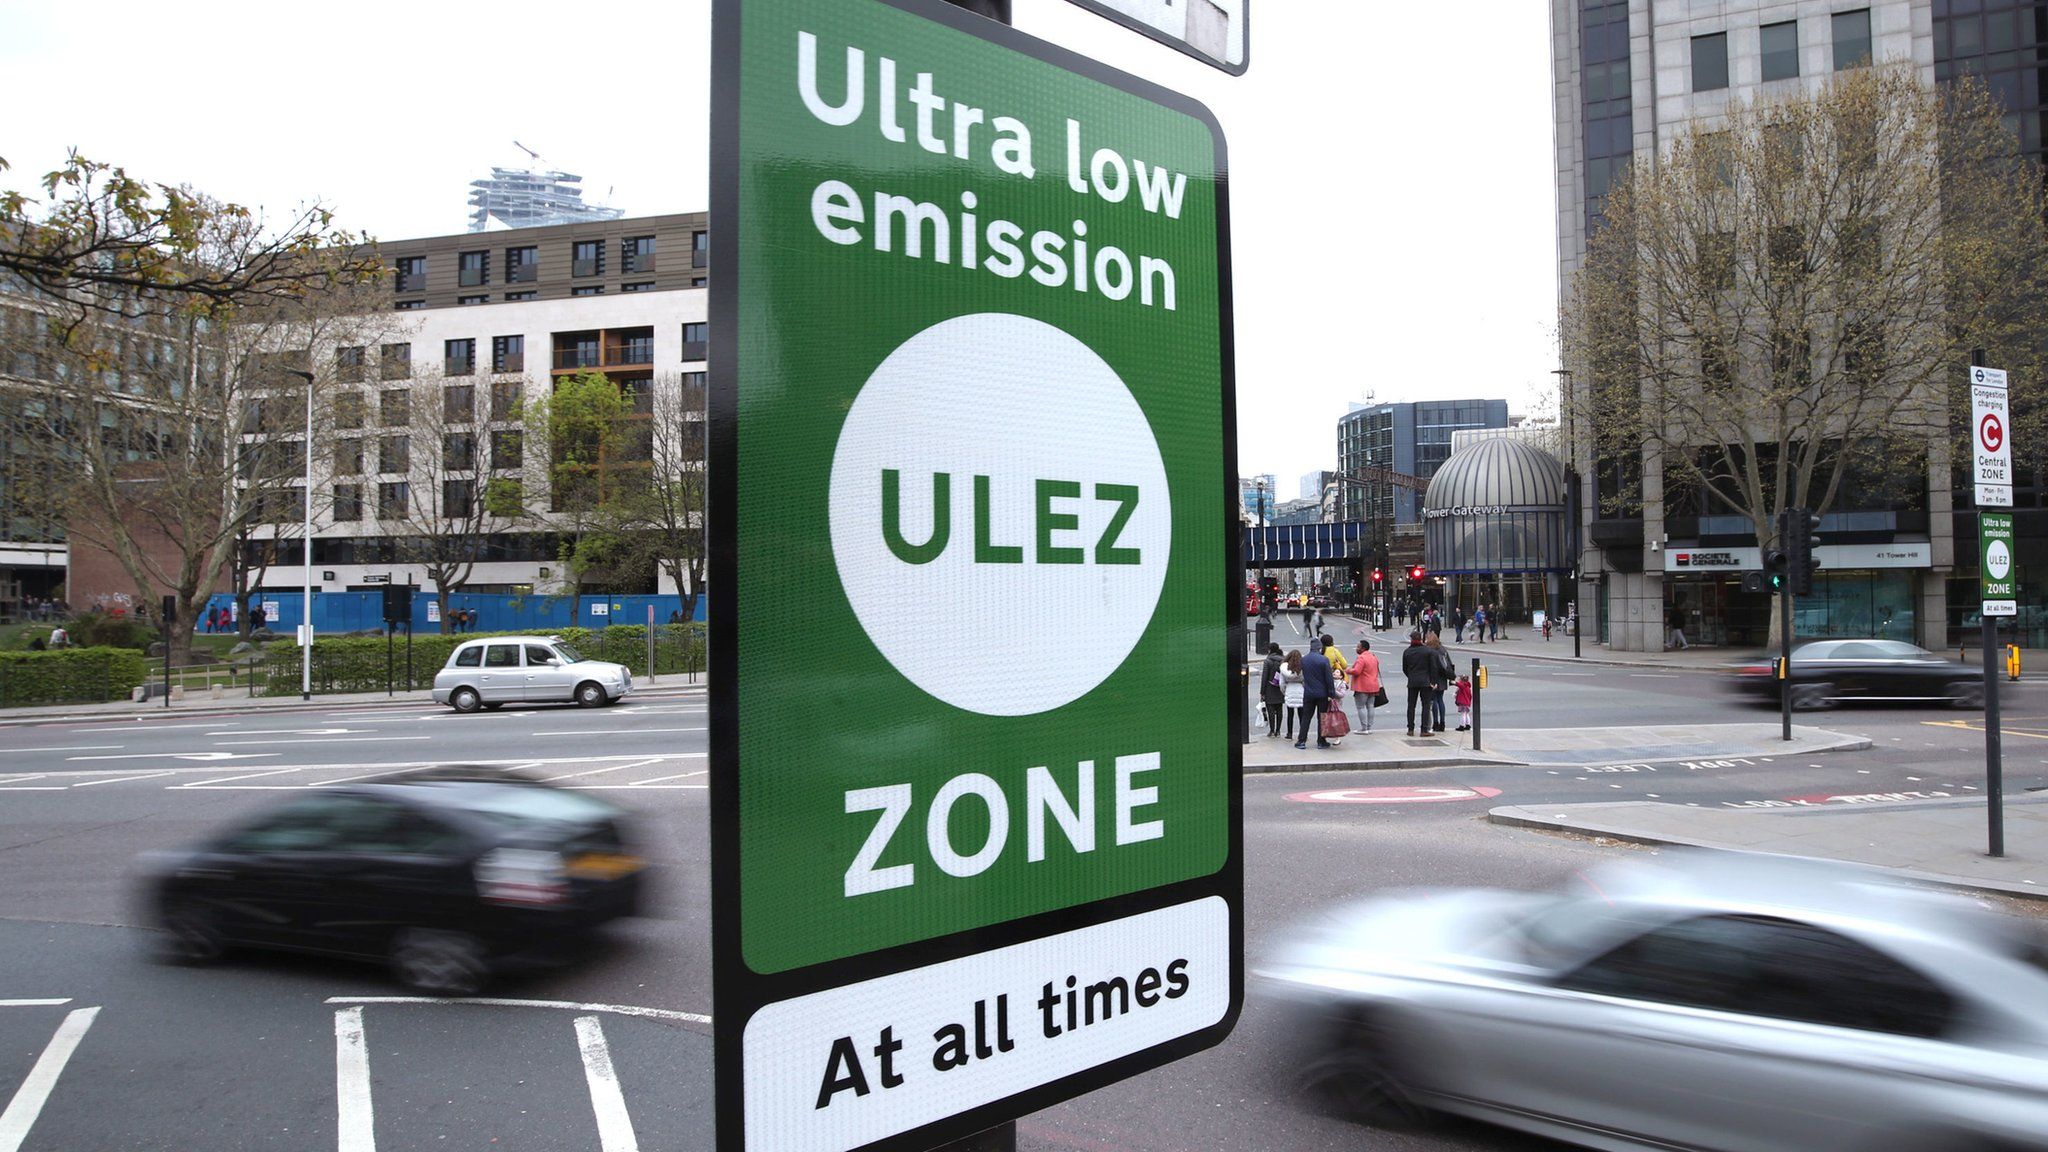 Ulez: What is it and why is its expansion controversial?